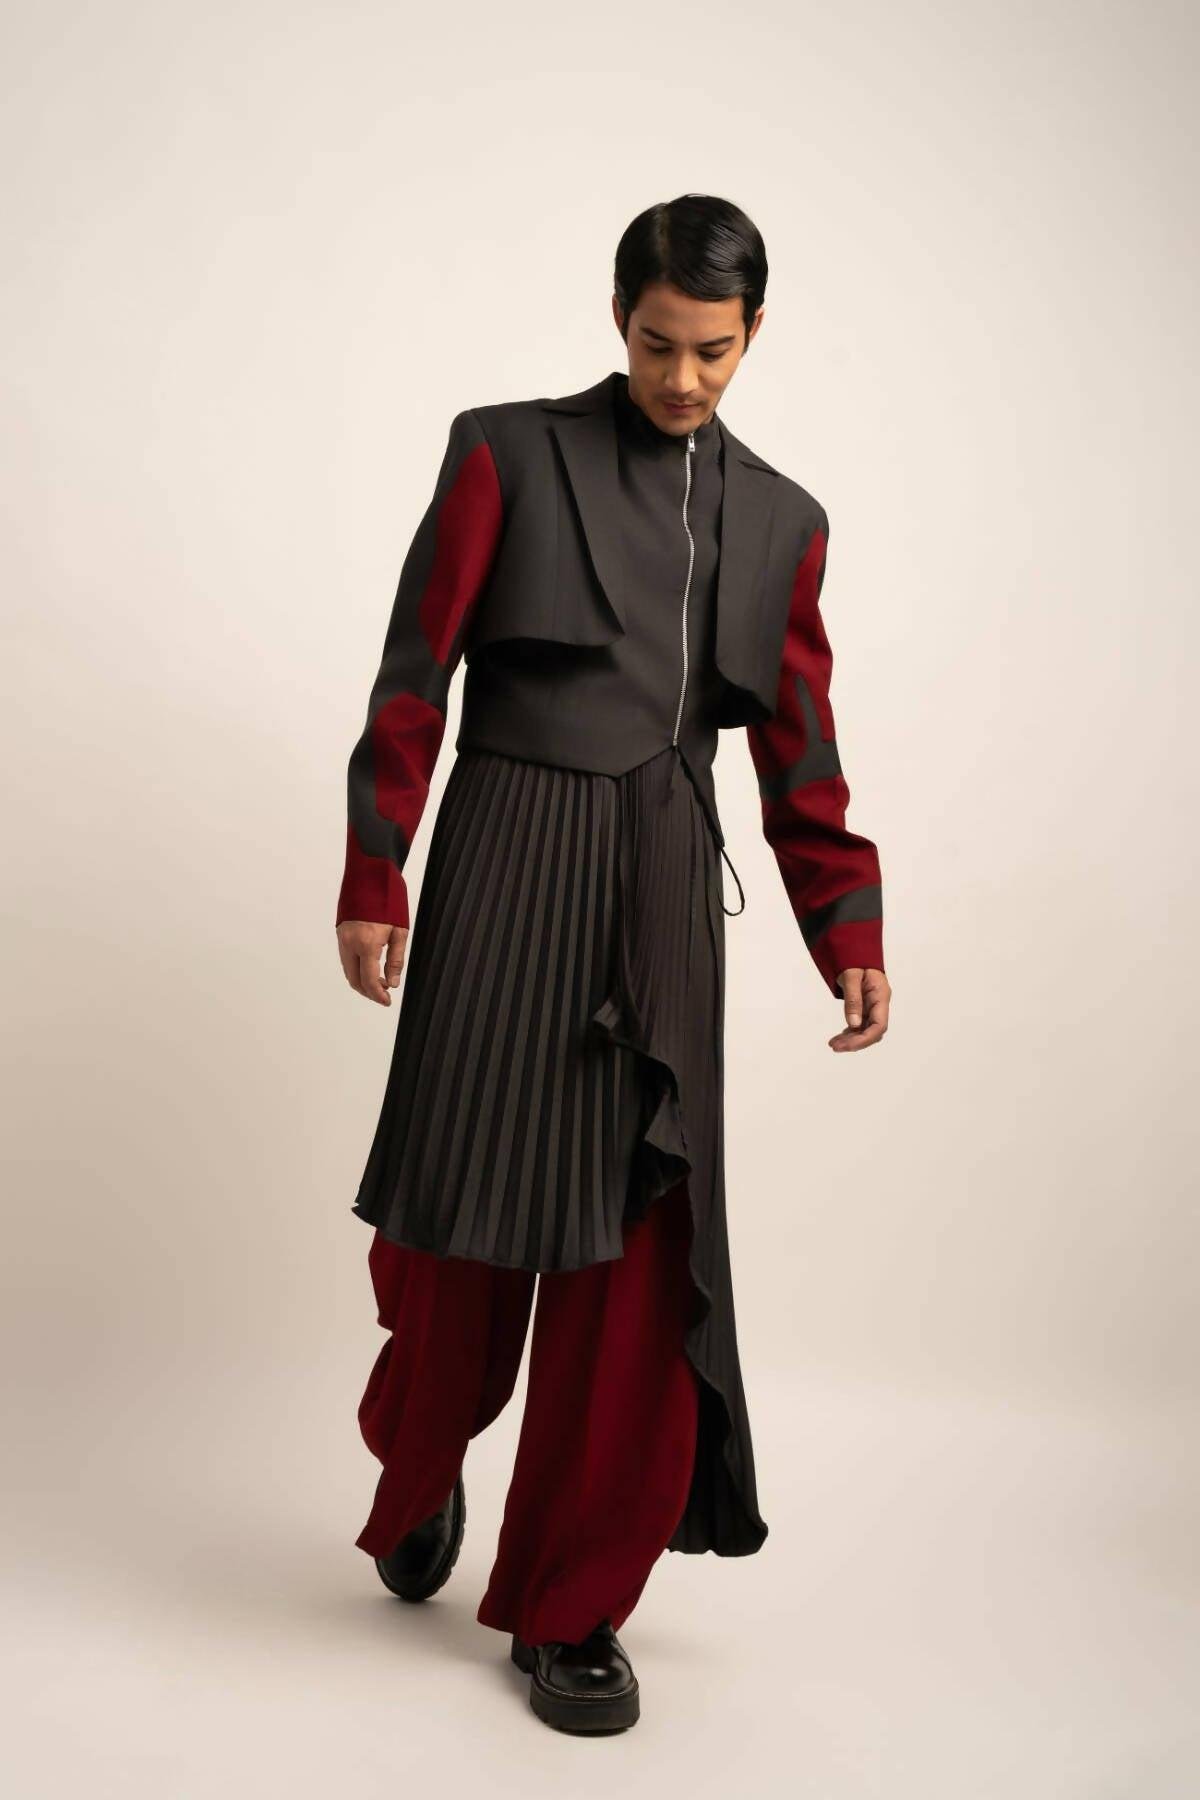 Seraphic Trousers Skirt Set by SIDDHANT AGRAWAL LABEL